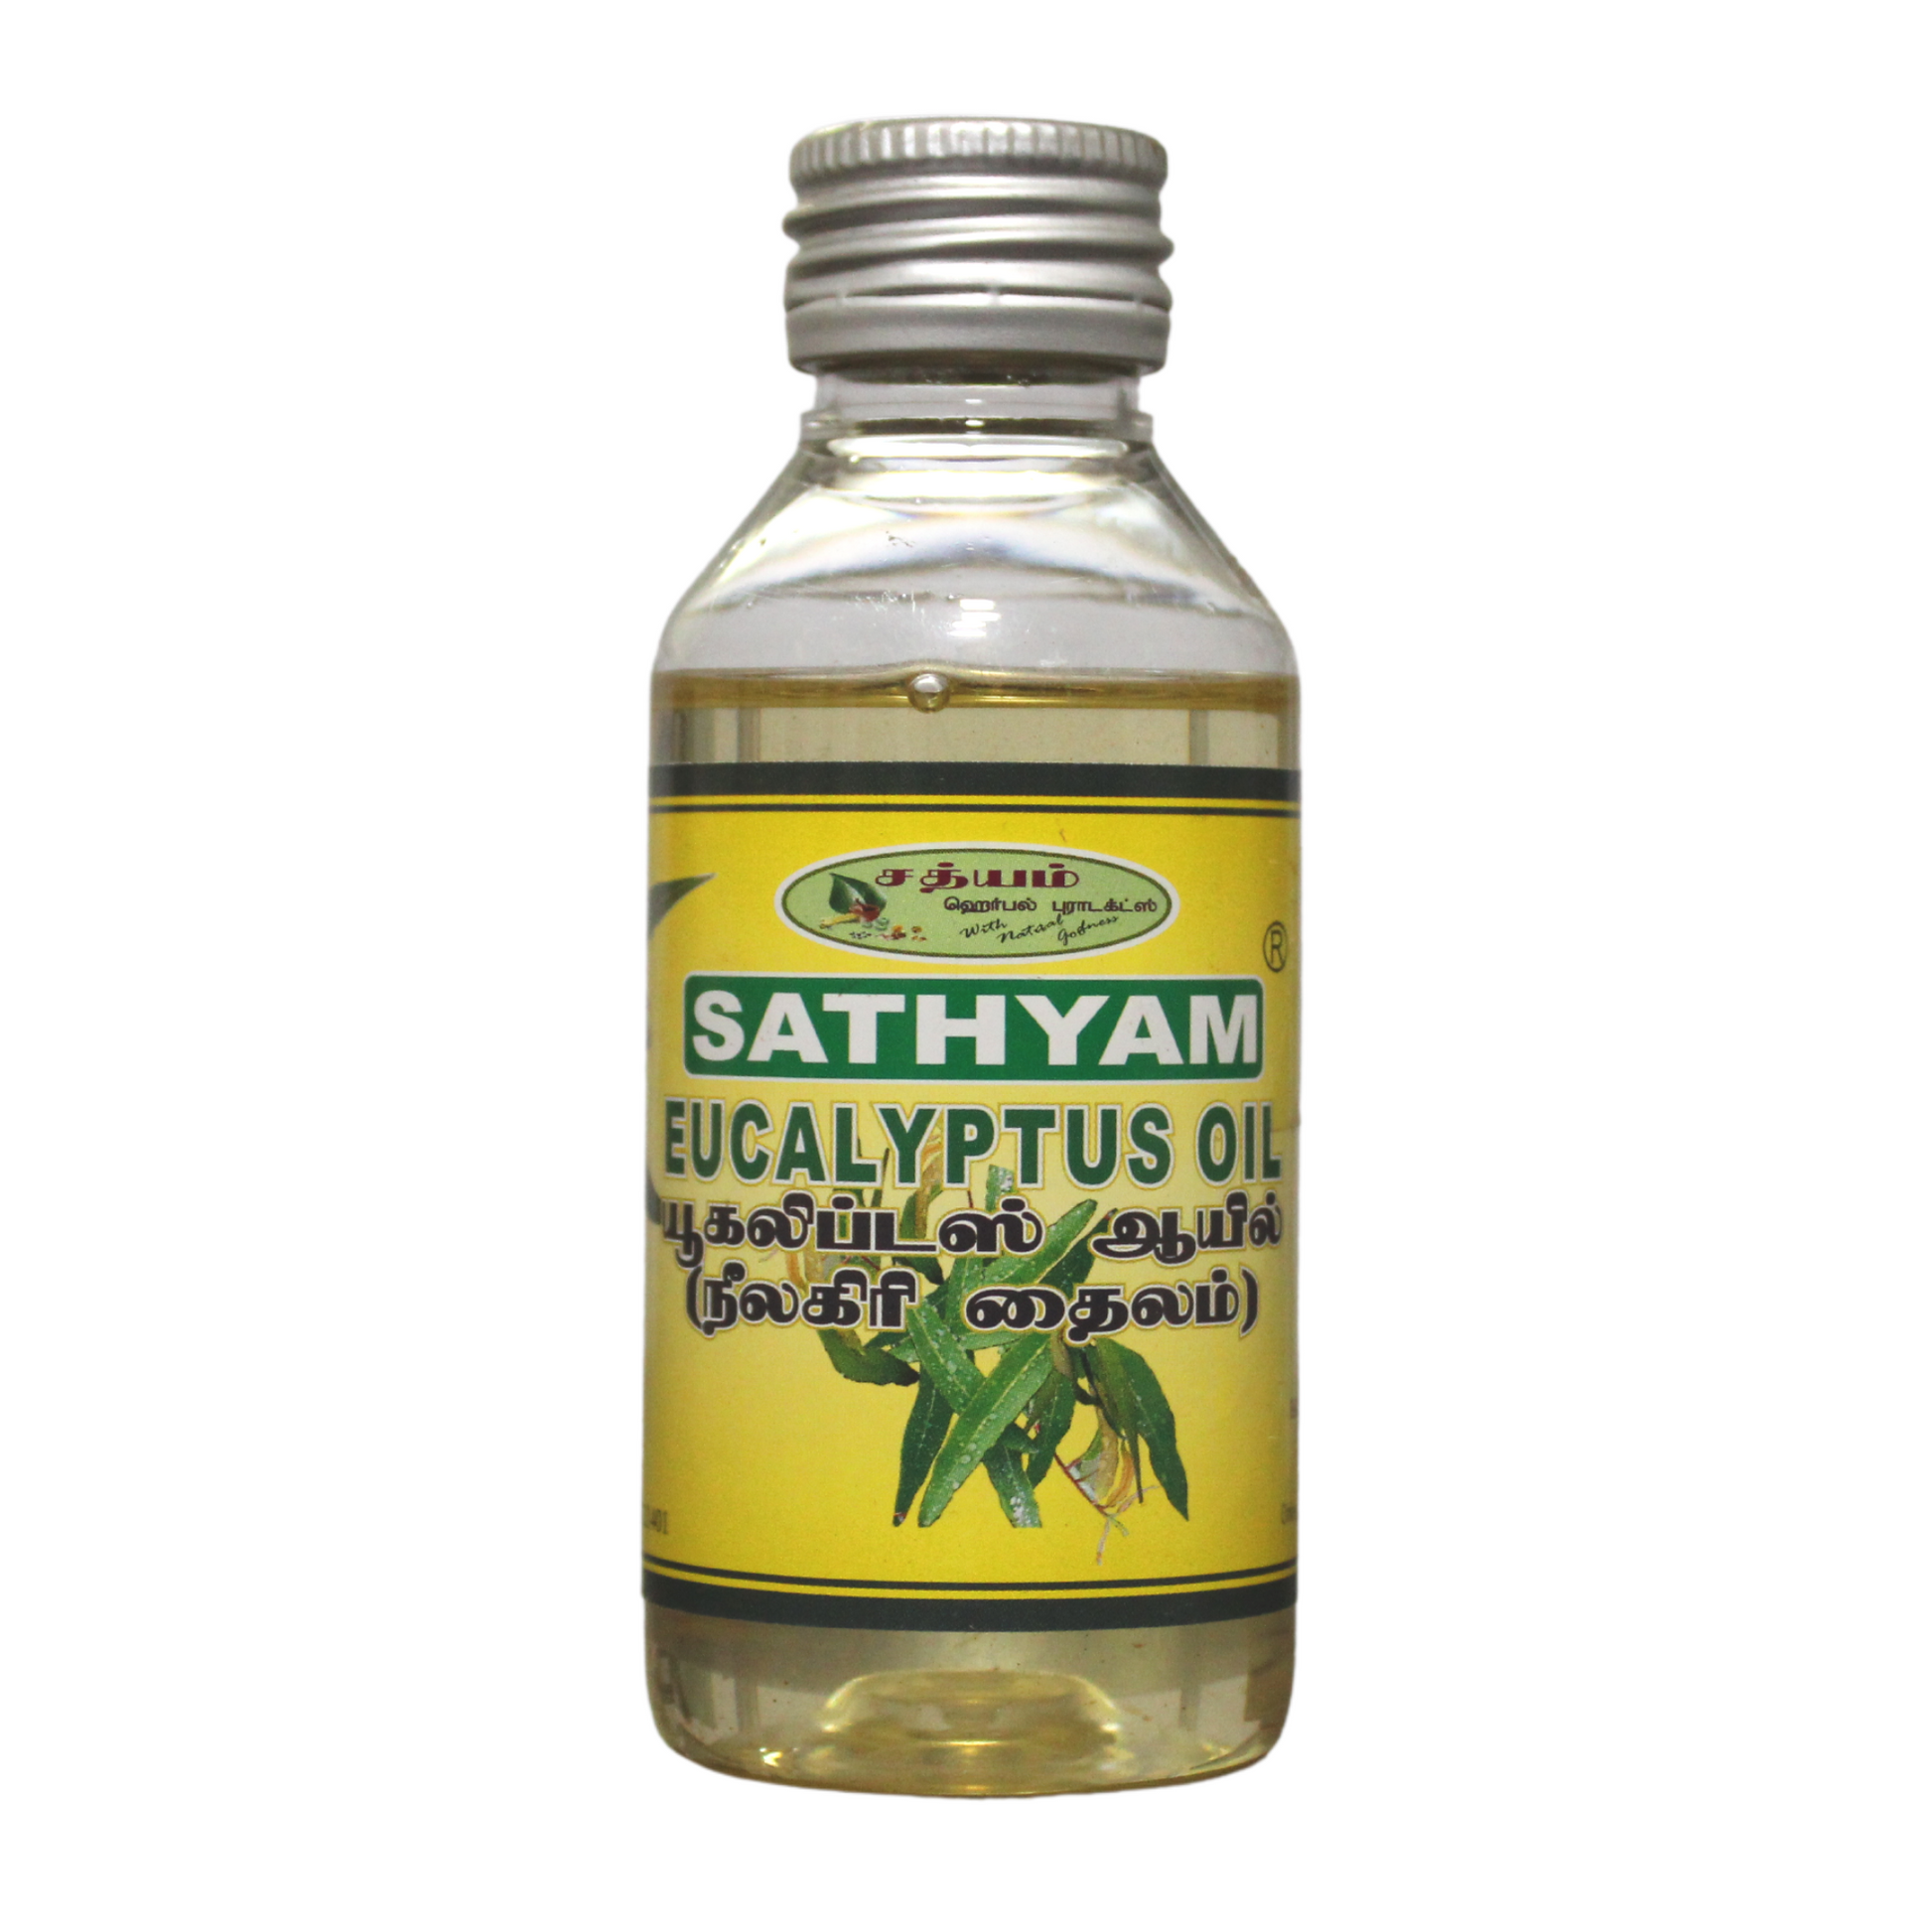 Shop Eucalyptus Oil 30ml at price 80.00 from Sathyam Herbals Online - Ayush Care